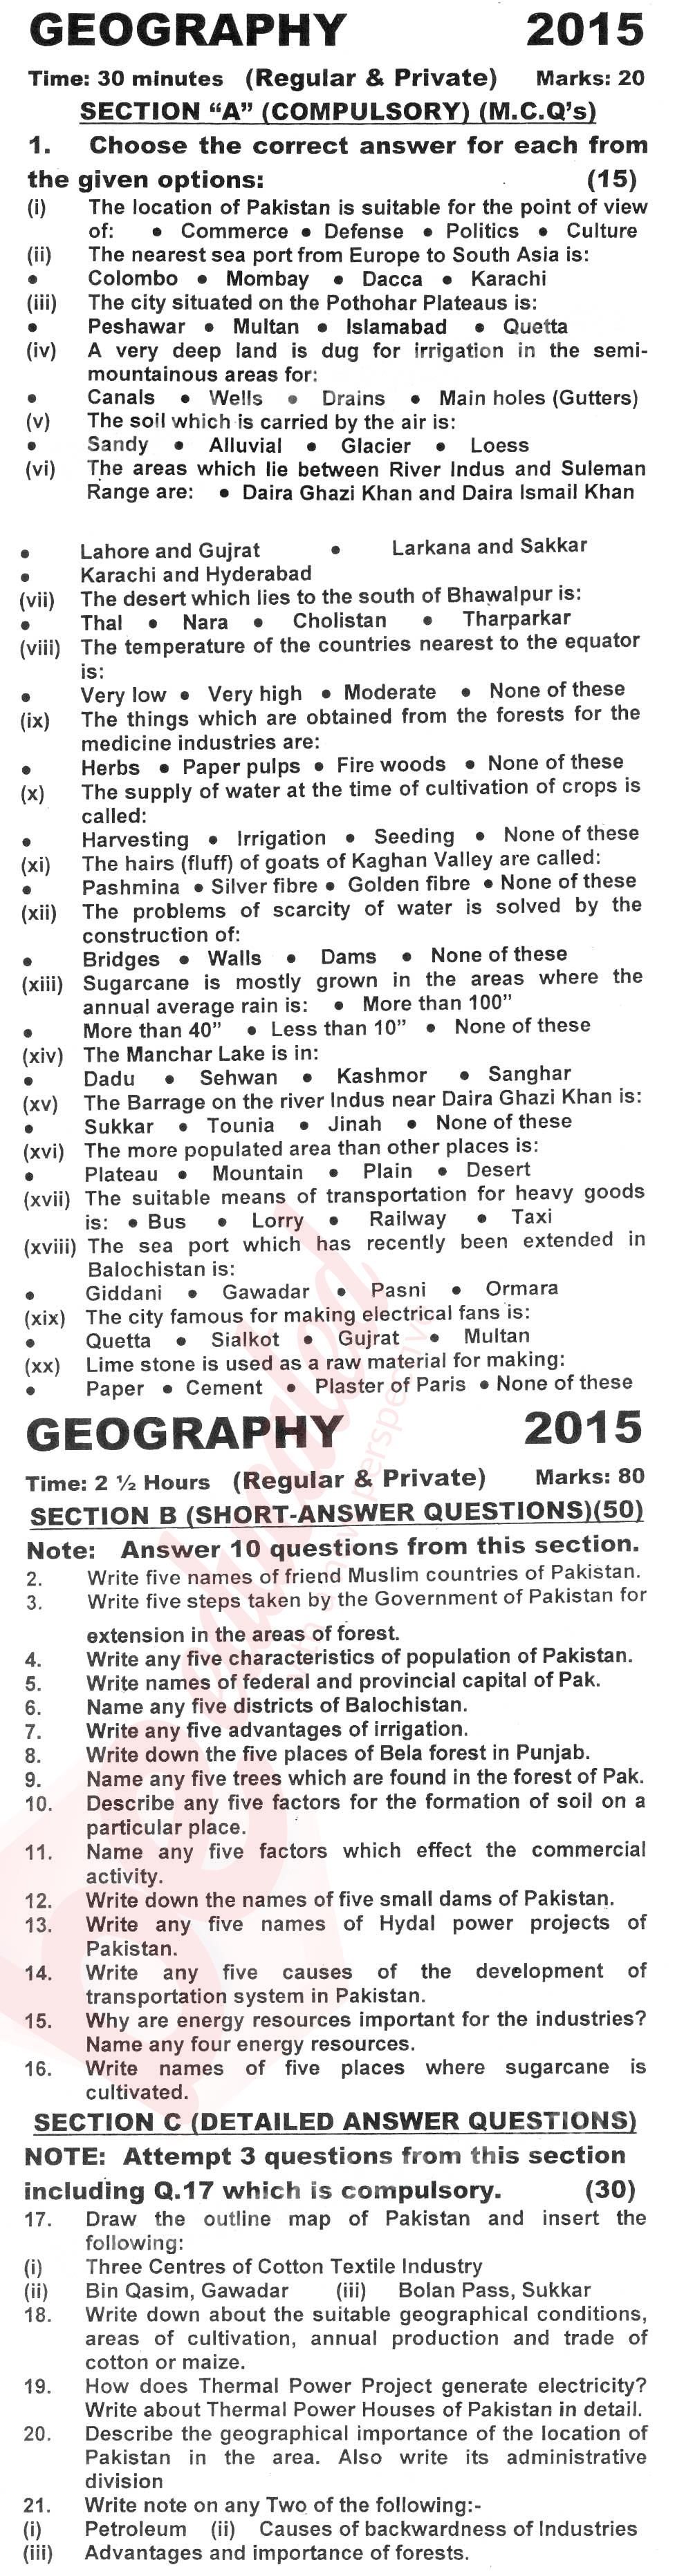 Commercial Geography 10th English Medium Past Paper Group 1 KPBTE 2015